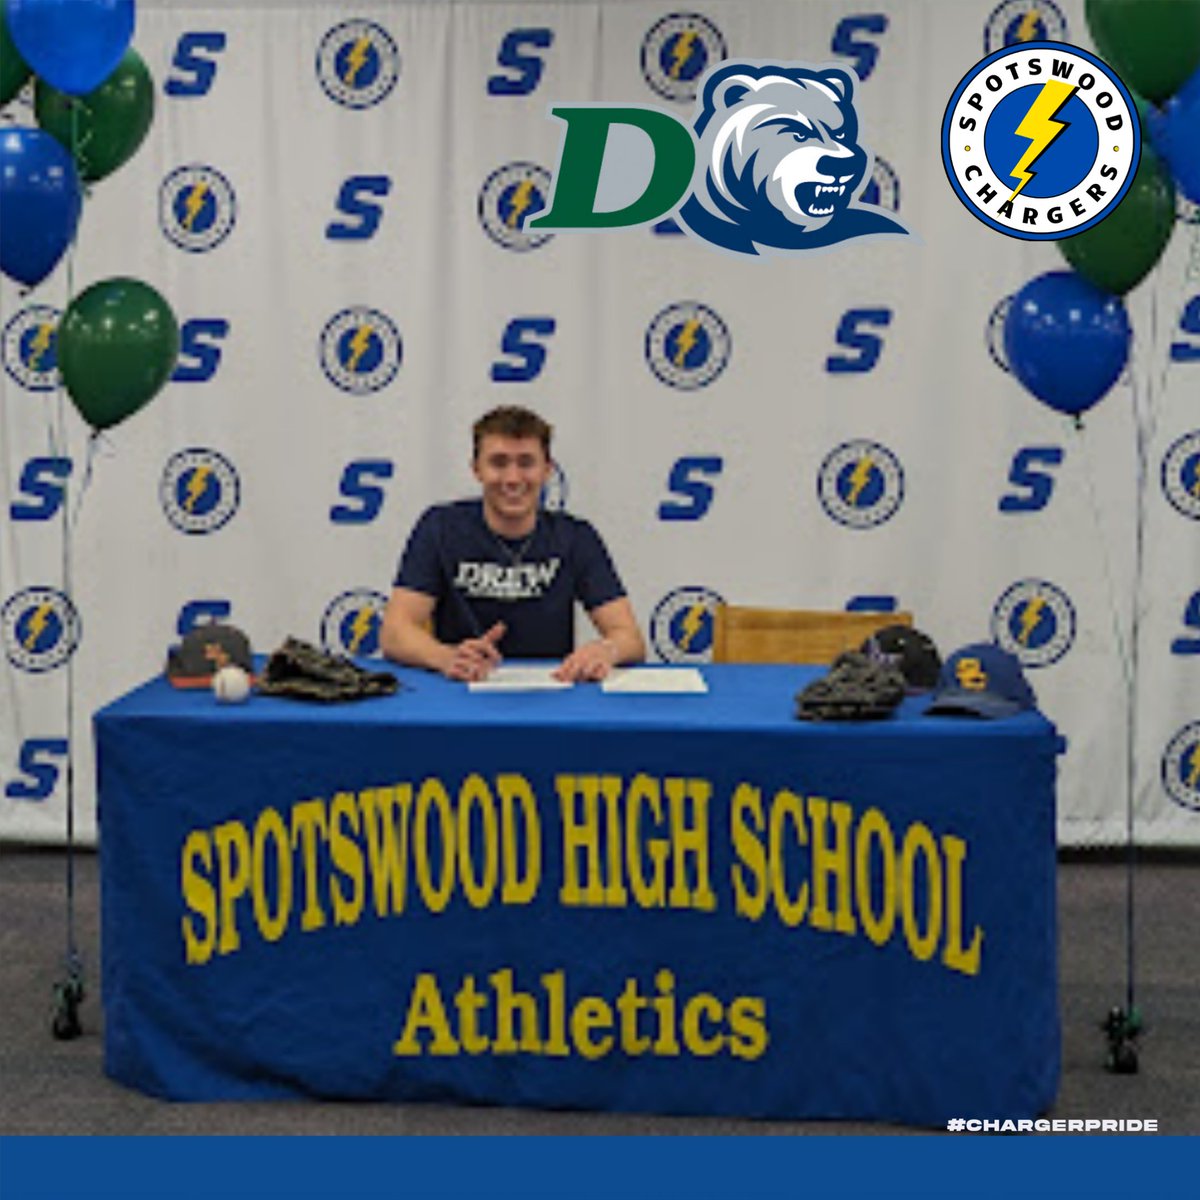 Congratulations to Senior Breckyn DeAngelis who will continue his athletic and academic career at Drew University in the 2024-2025 school year. @DrewUBaseball